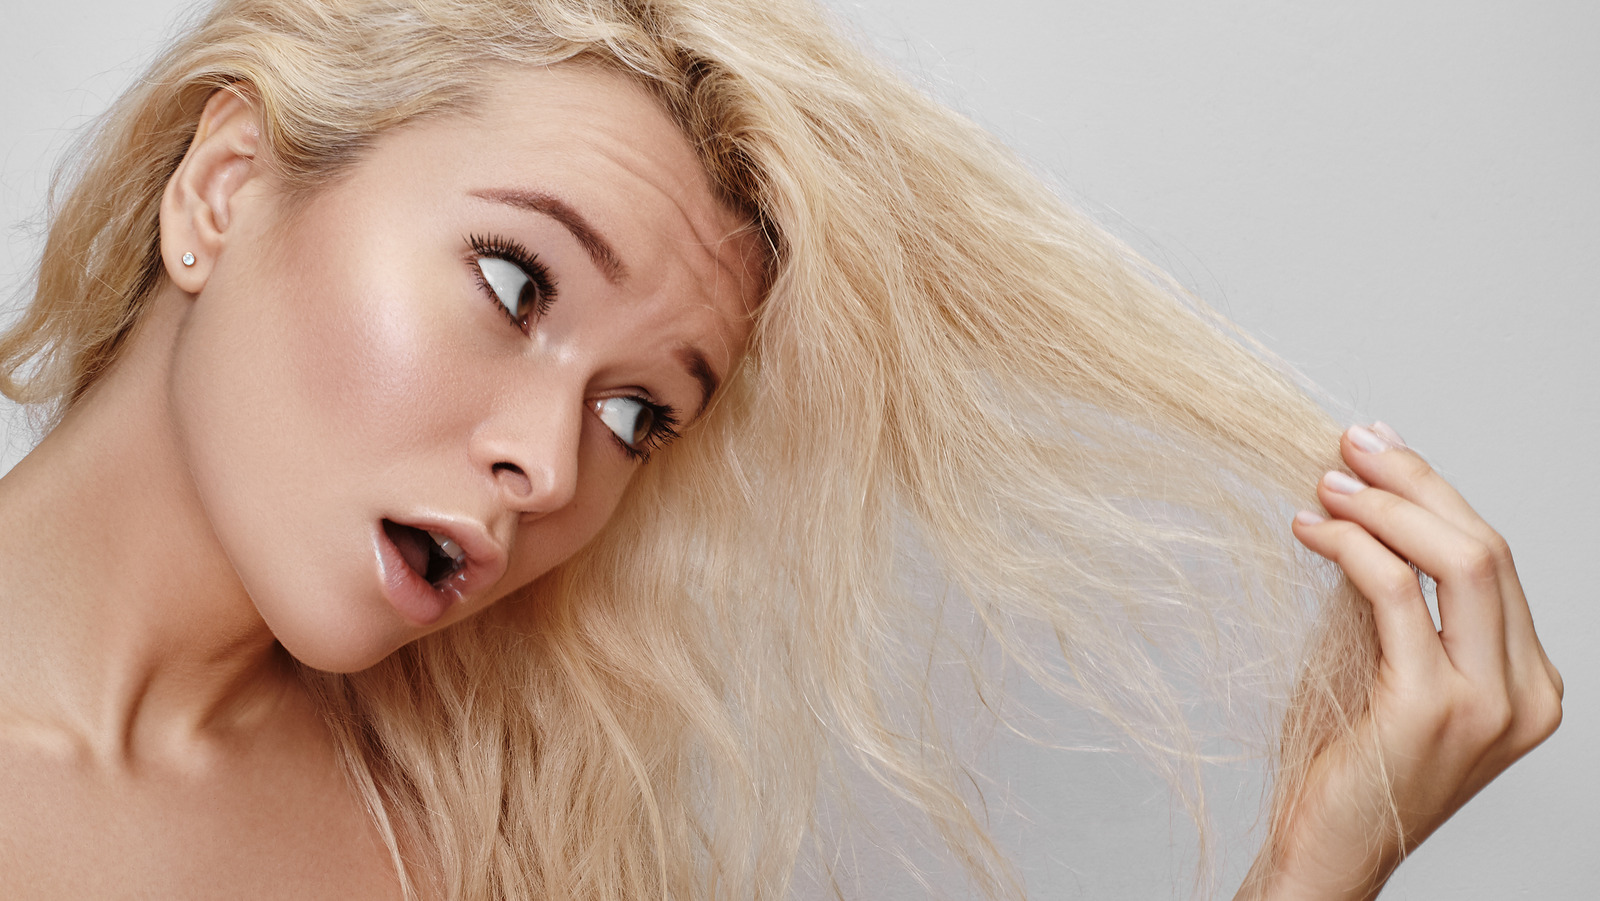 3. 10 Things You Need to Know Before Bleaching Your Hair Blonde - wide 1